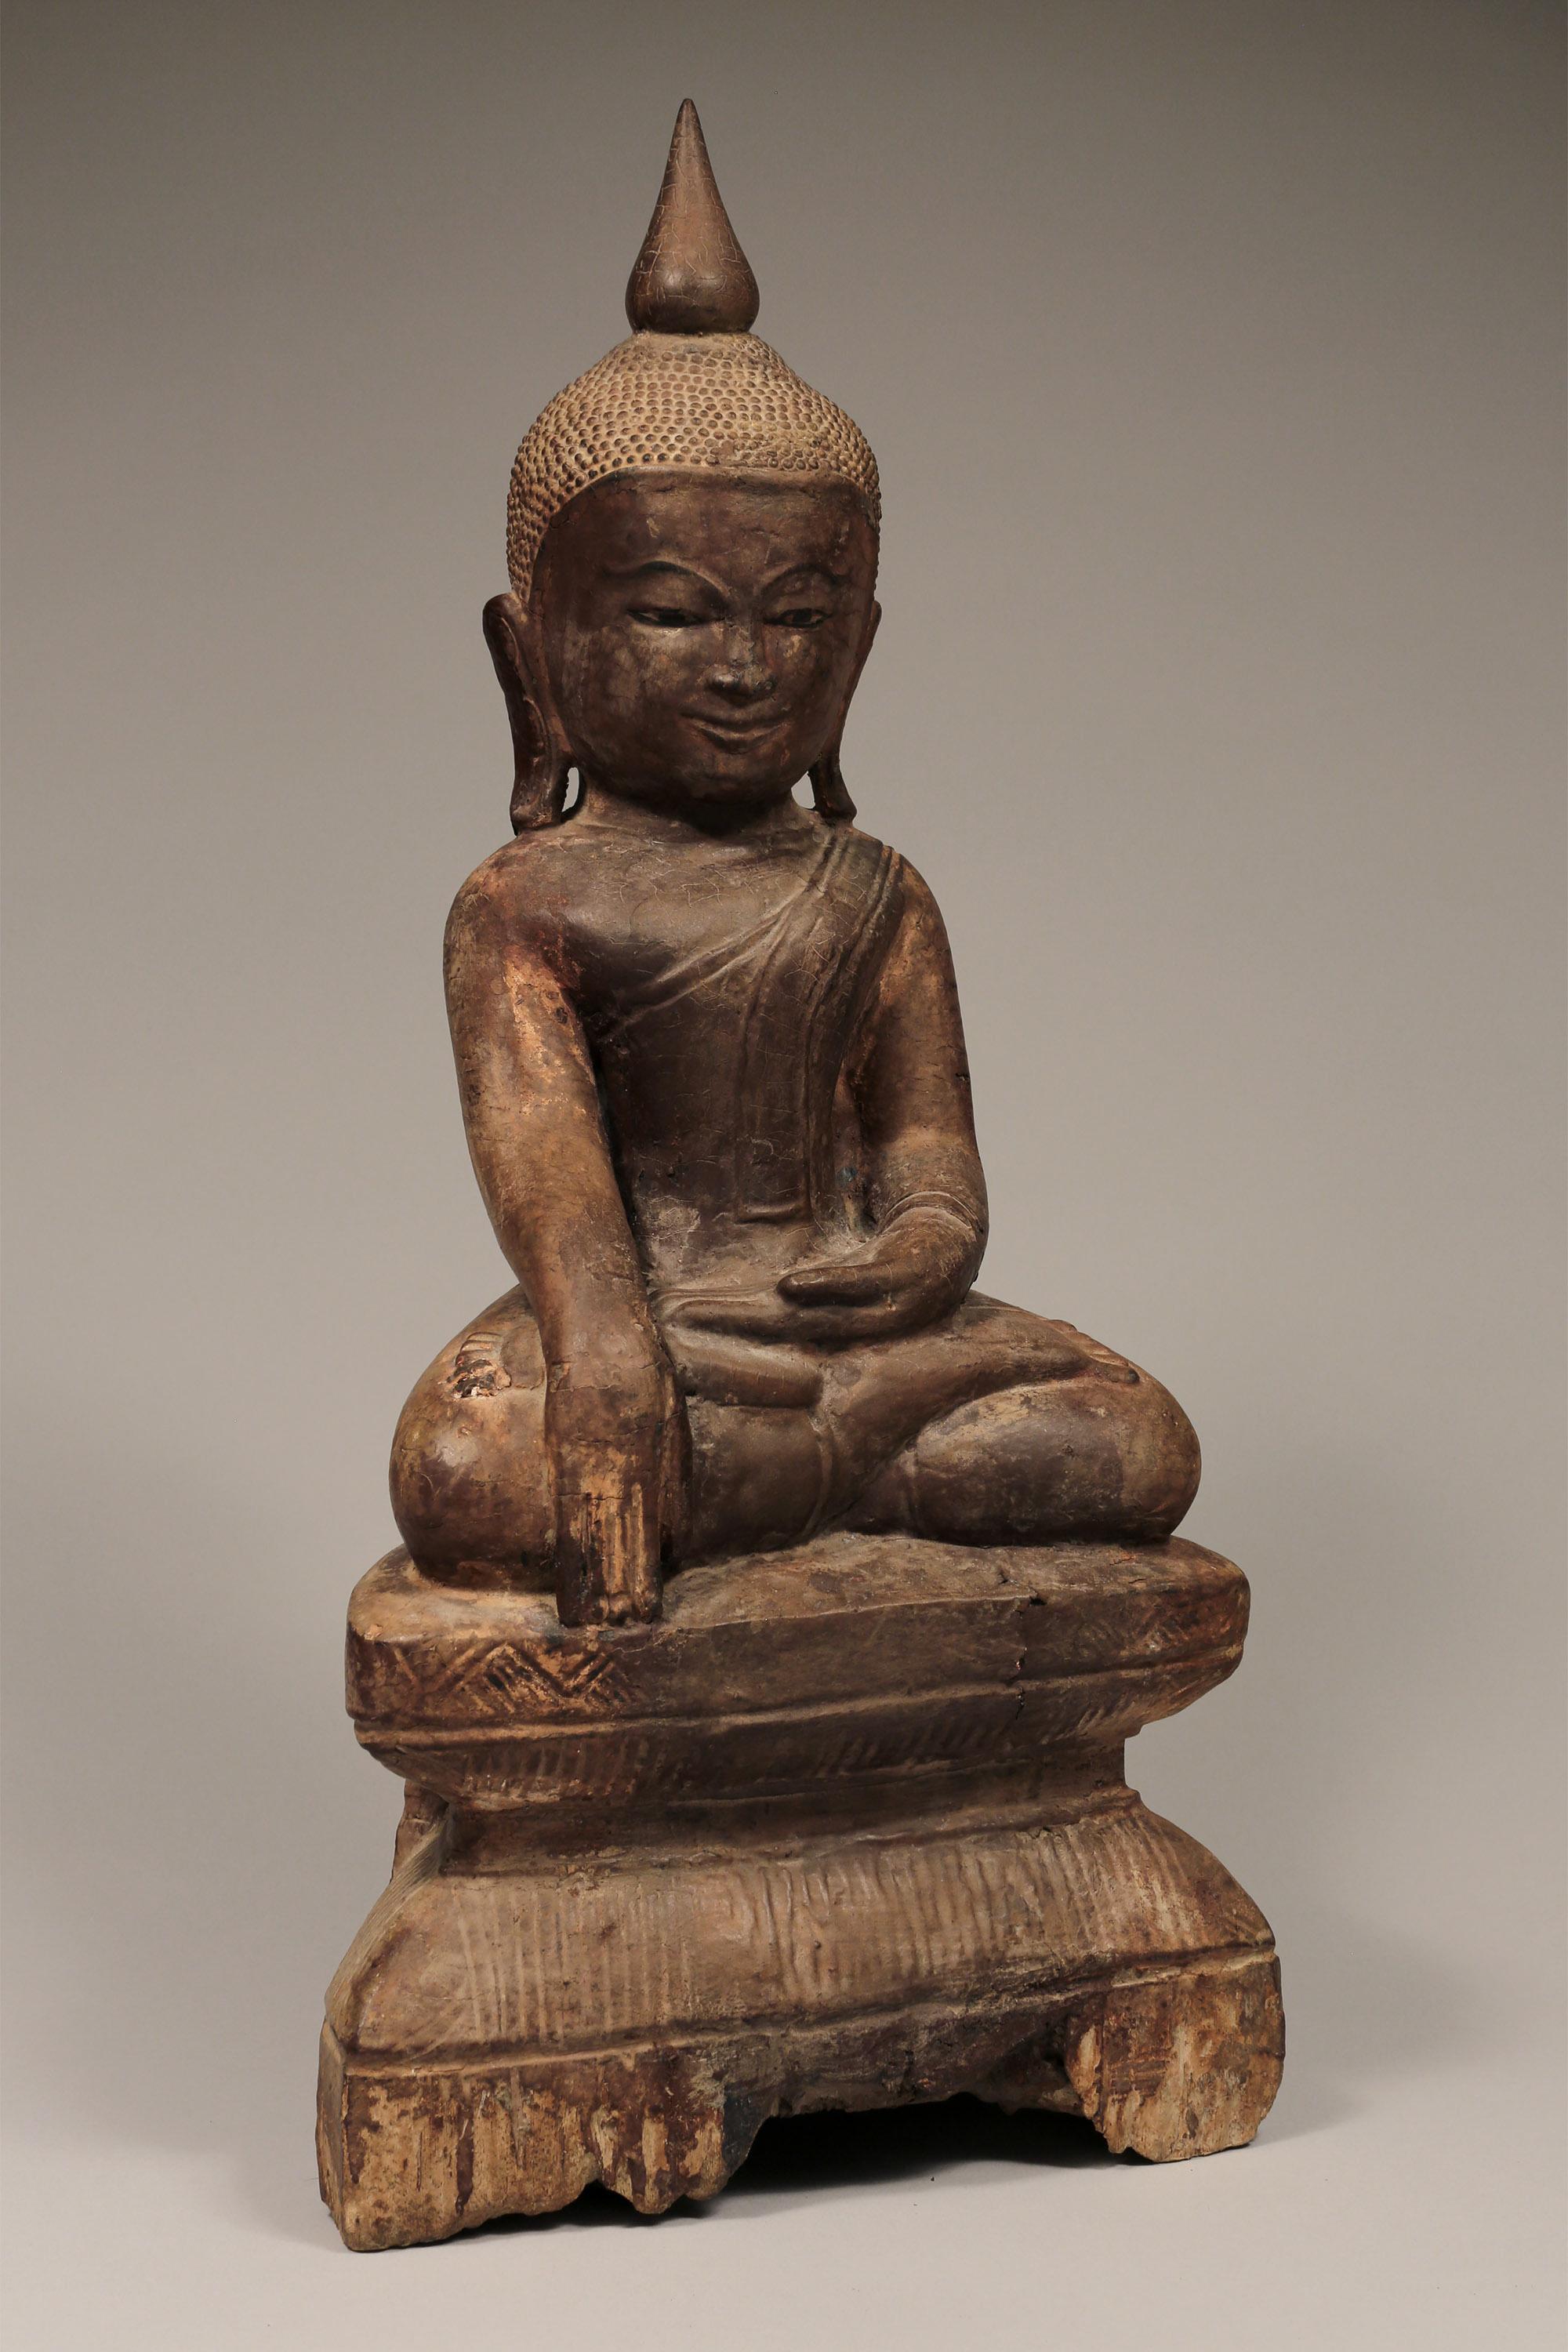 Seated wooden Buddha
Burma,
19th-20th century (Mandalay period)
Measures: H 19.5 x W 9 in x D 4.5 in

Youthful, sweet-faced image of the Buddha, seated in the Bhumisparsa mudra, translated as the “earth touching gesture”.
   